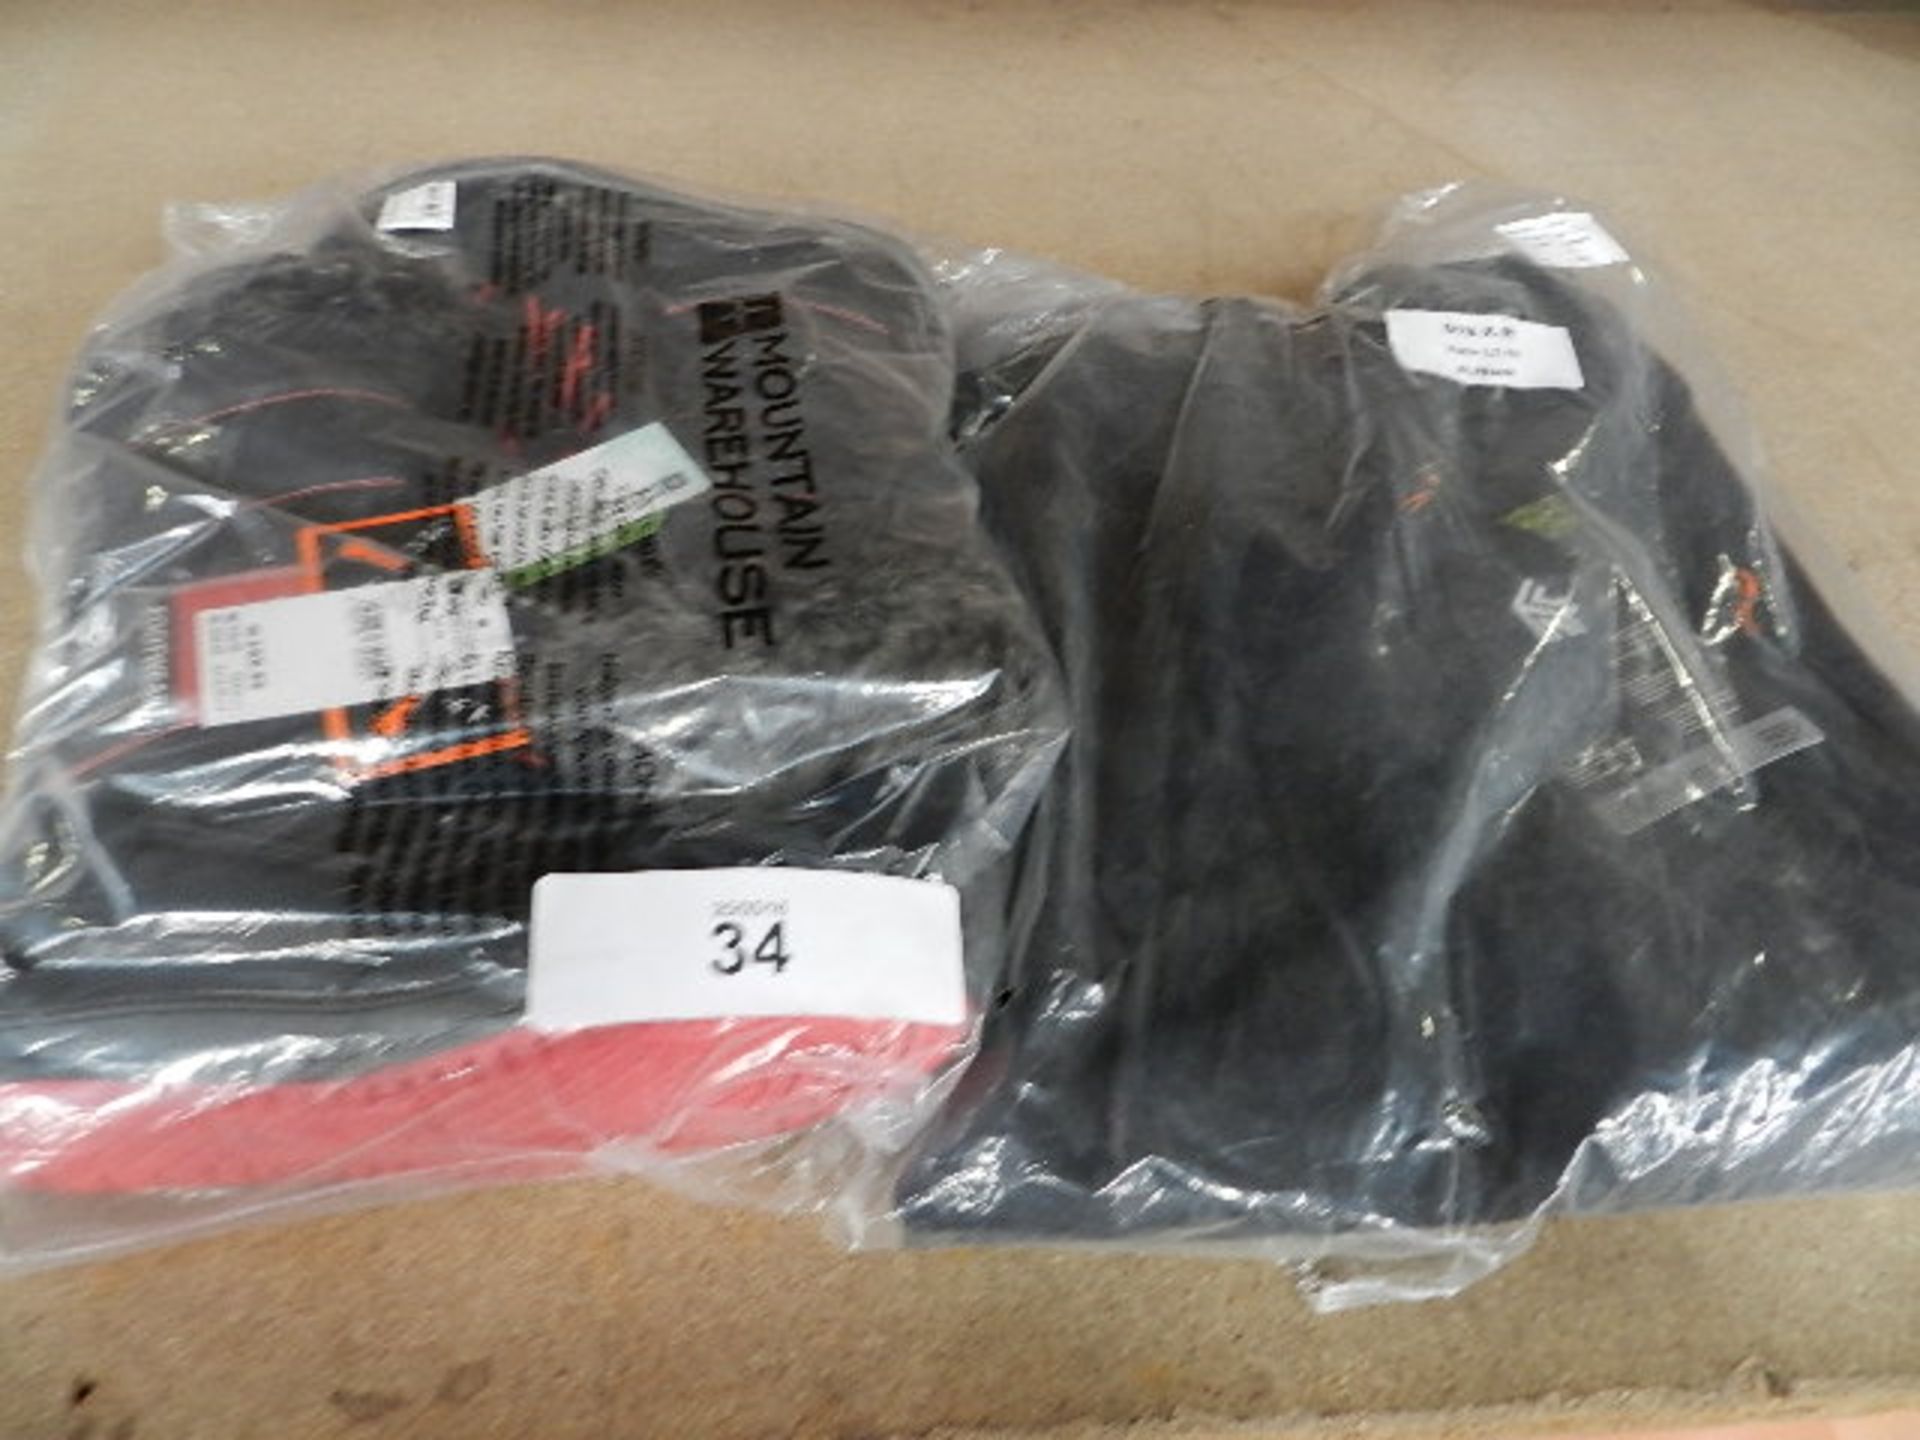 A pair of Polartec Vanir LT-16 trainers, size XL and a pair of Mountain Warehouse snow boots, UK